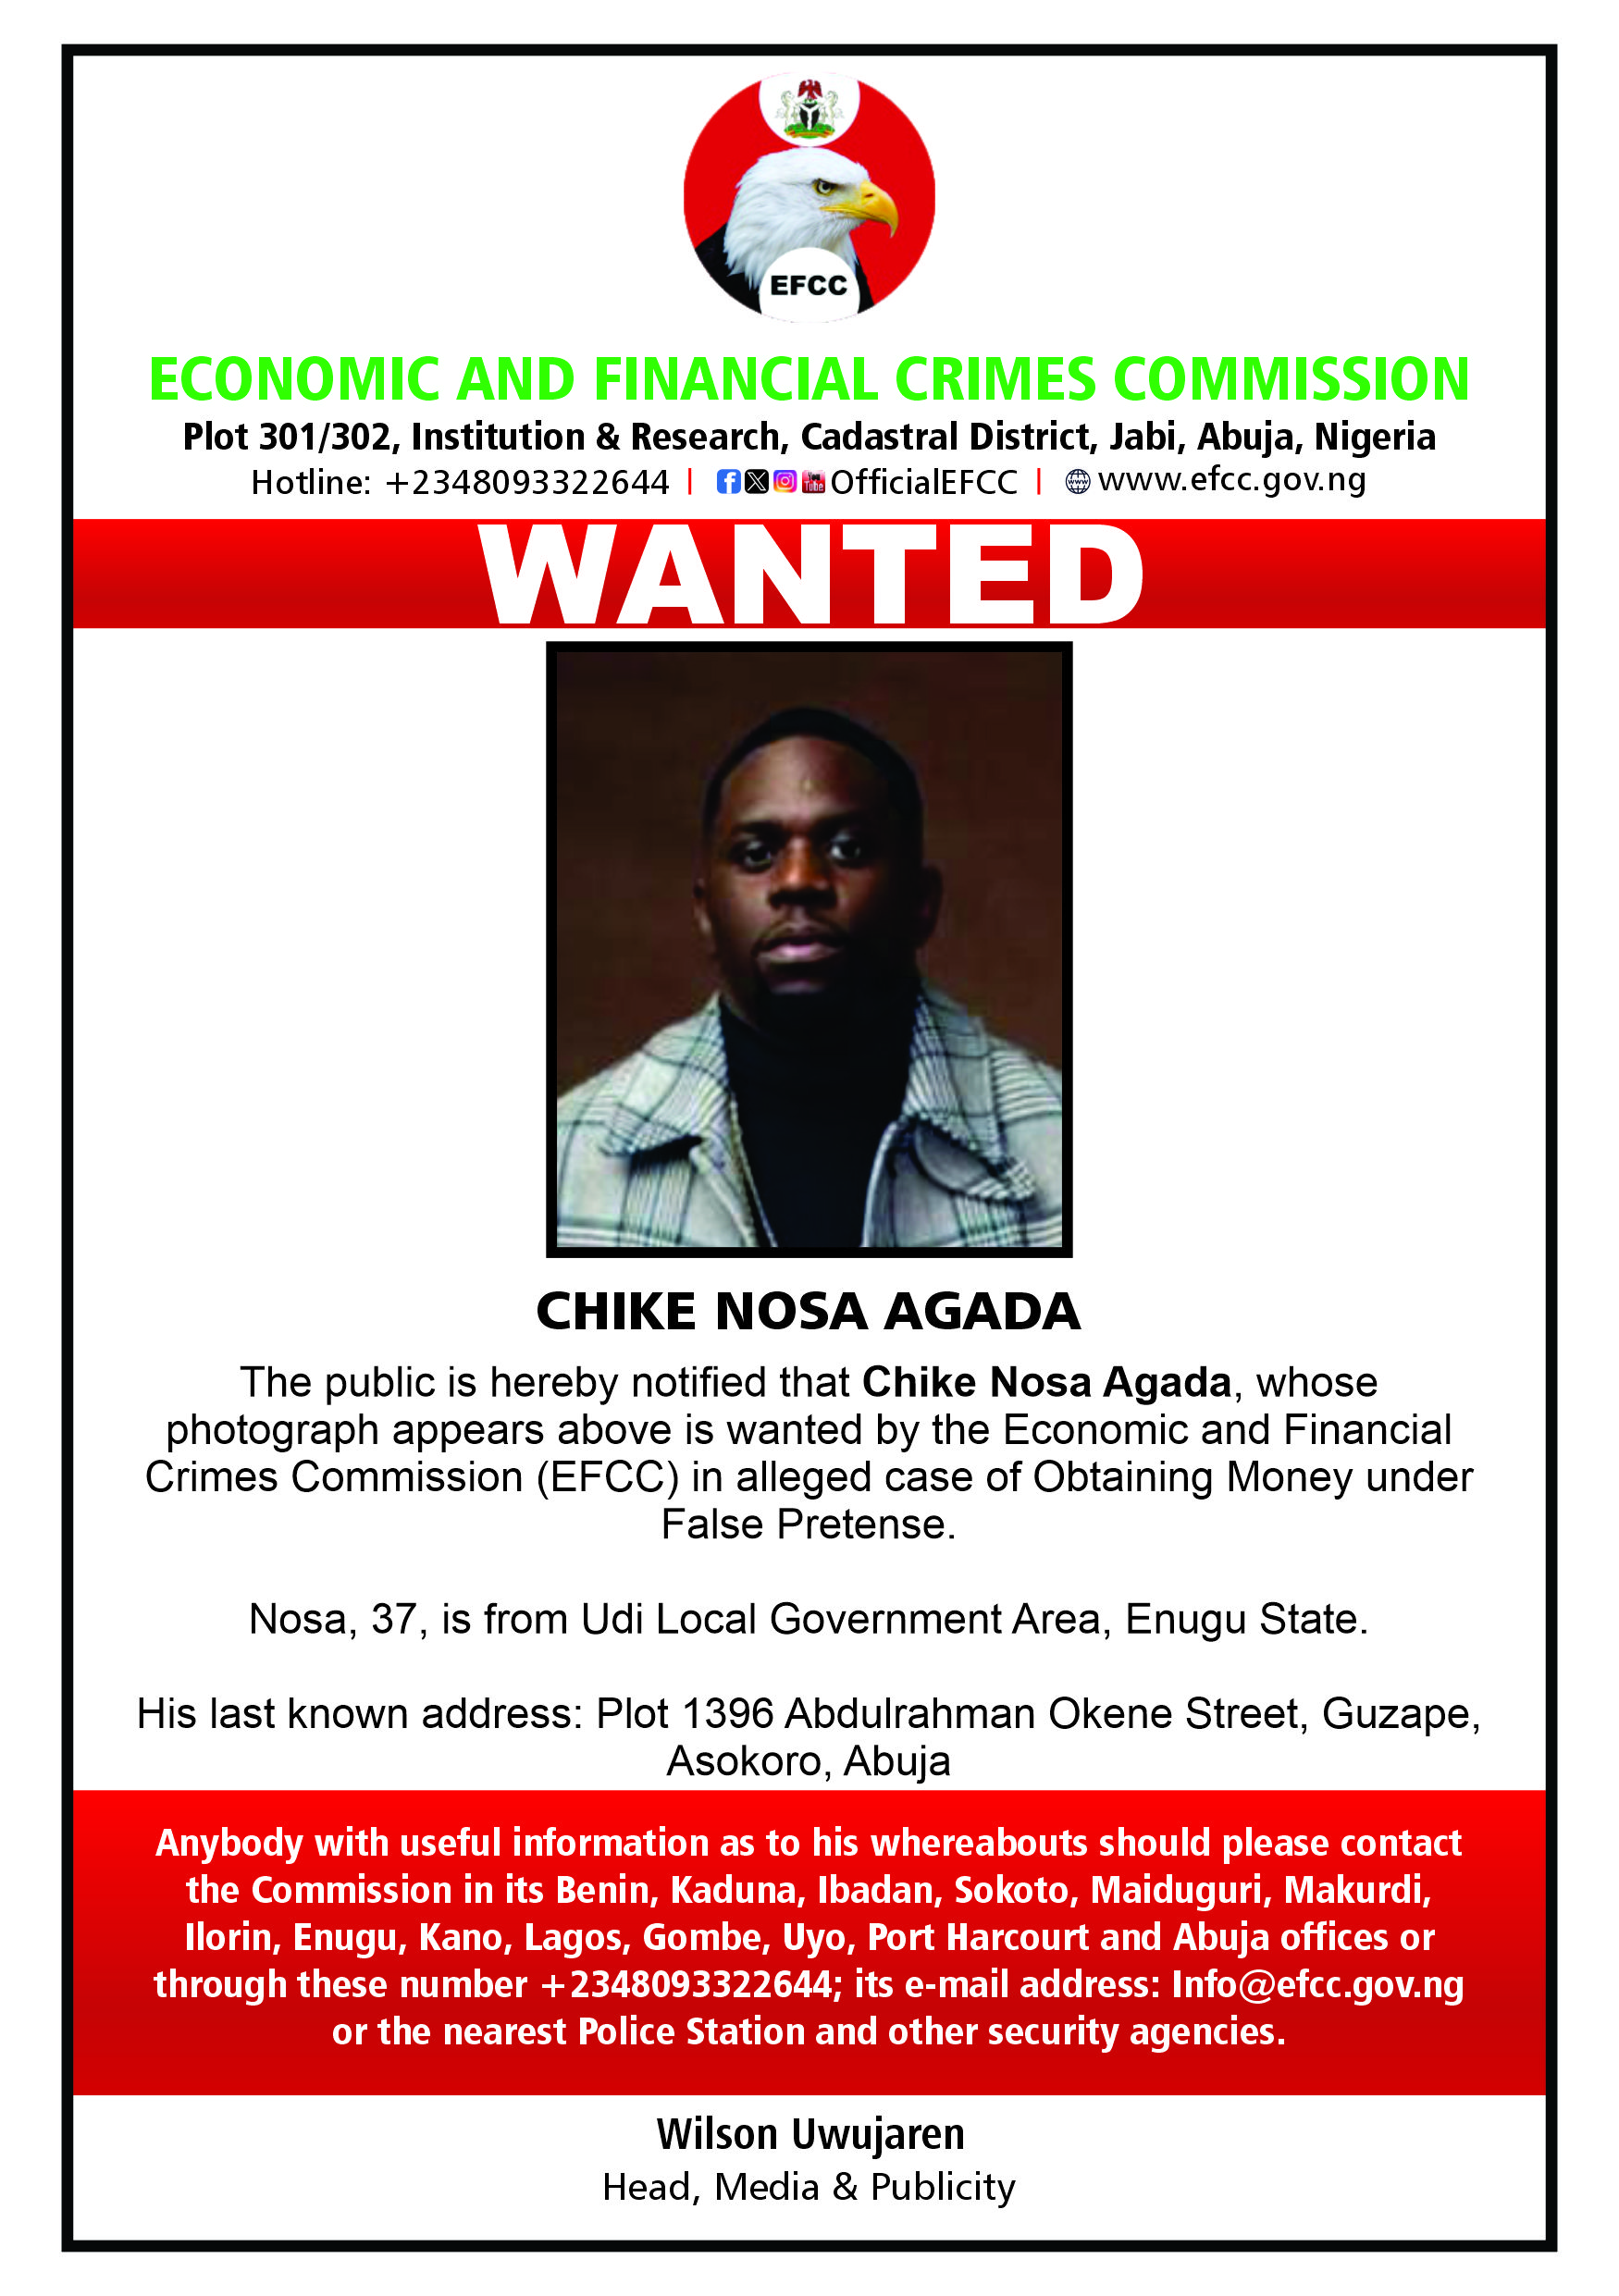 Chike Nosa Agada wanted by EFCC